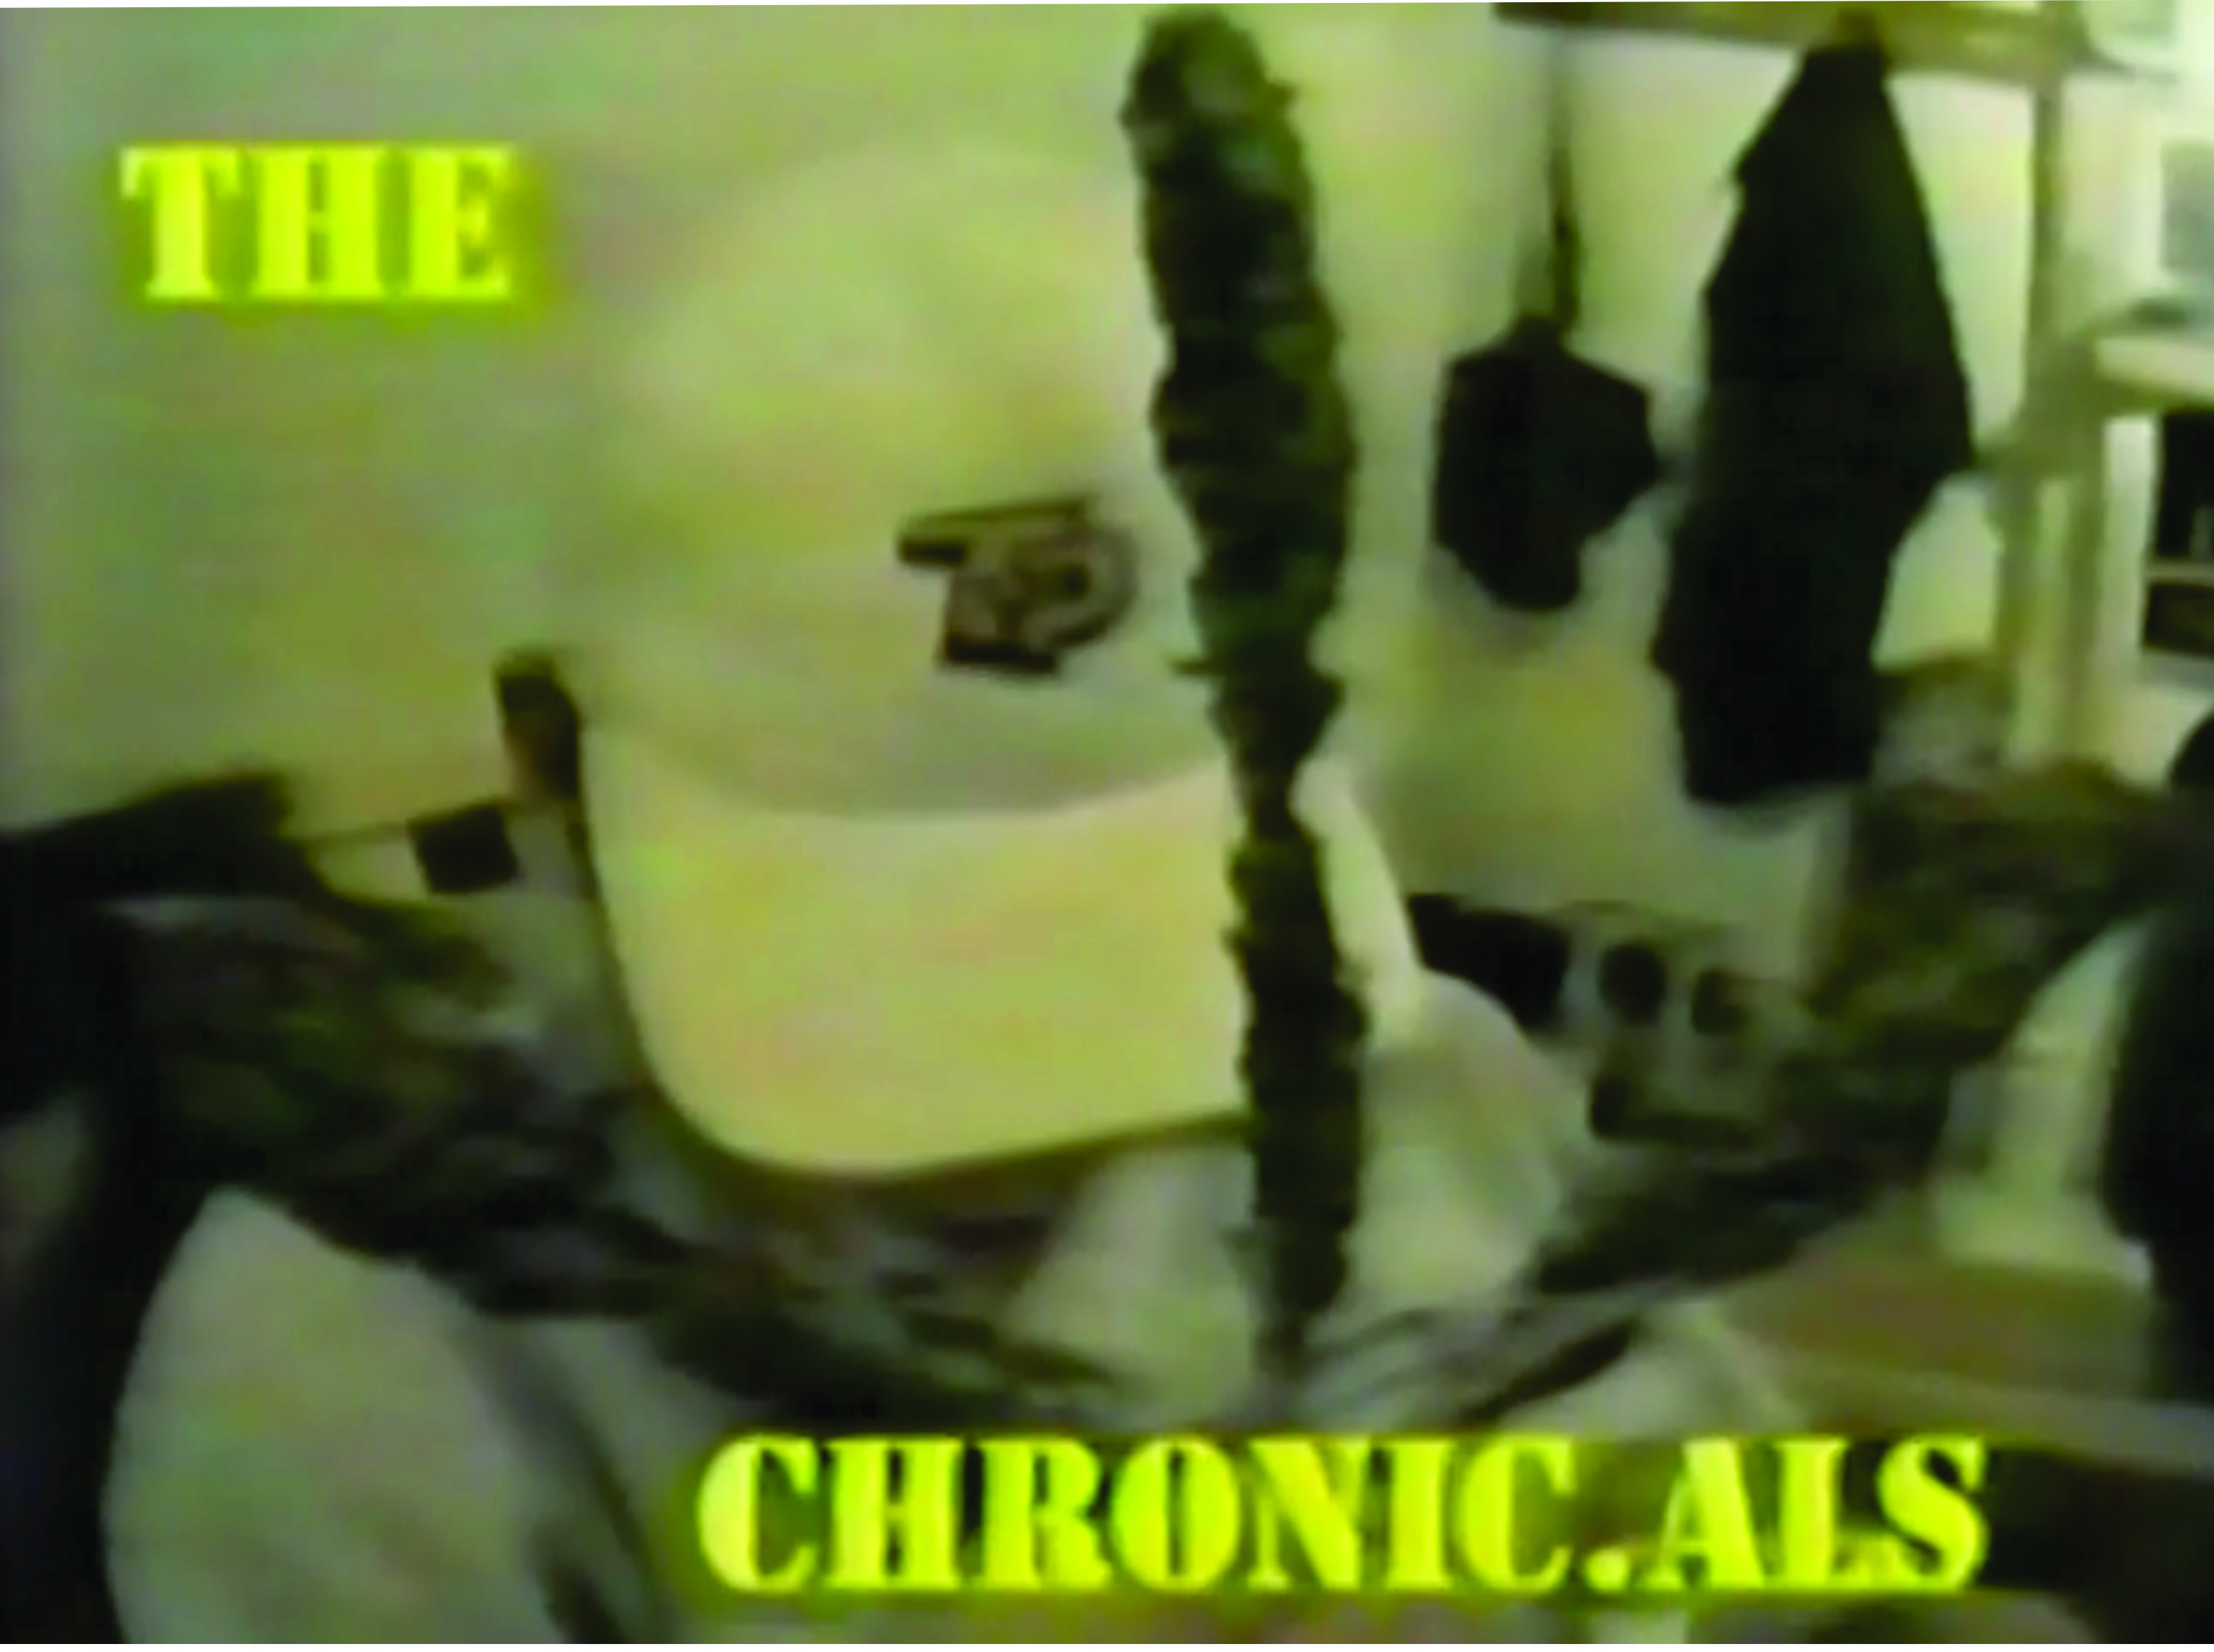 Top Of The World - The Chronic.als cover